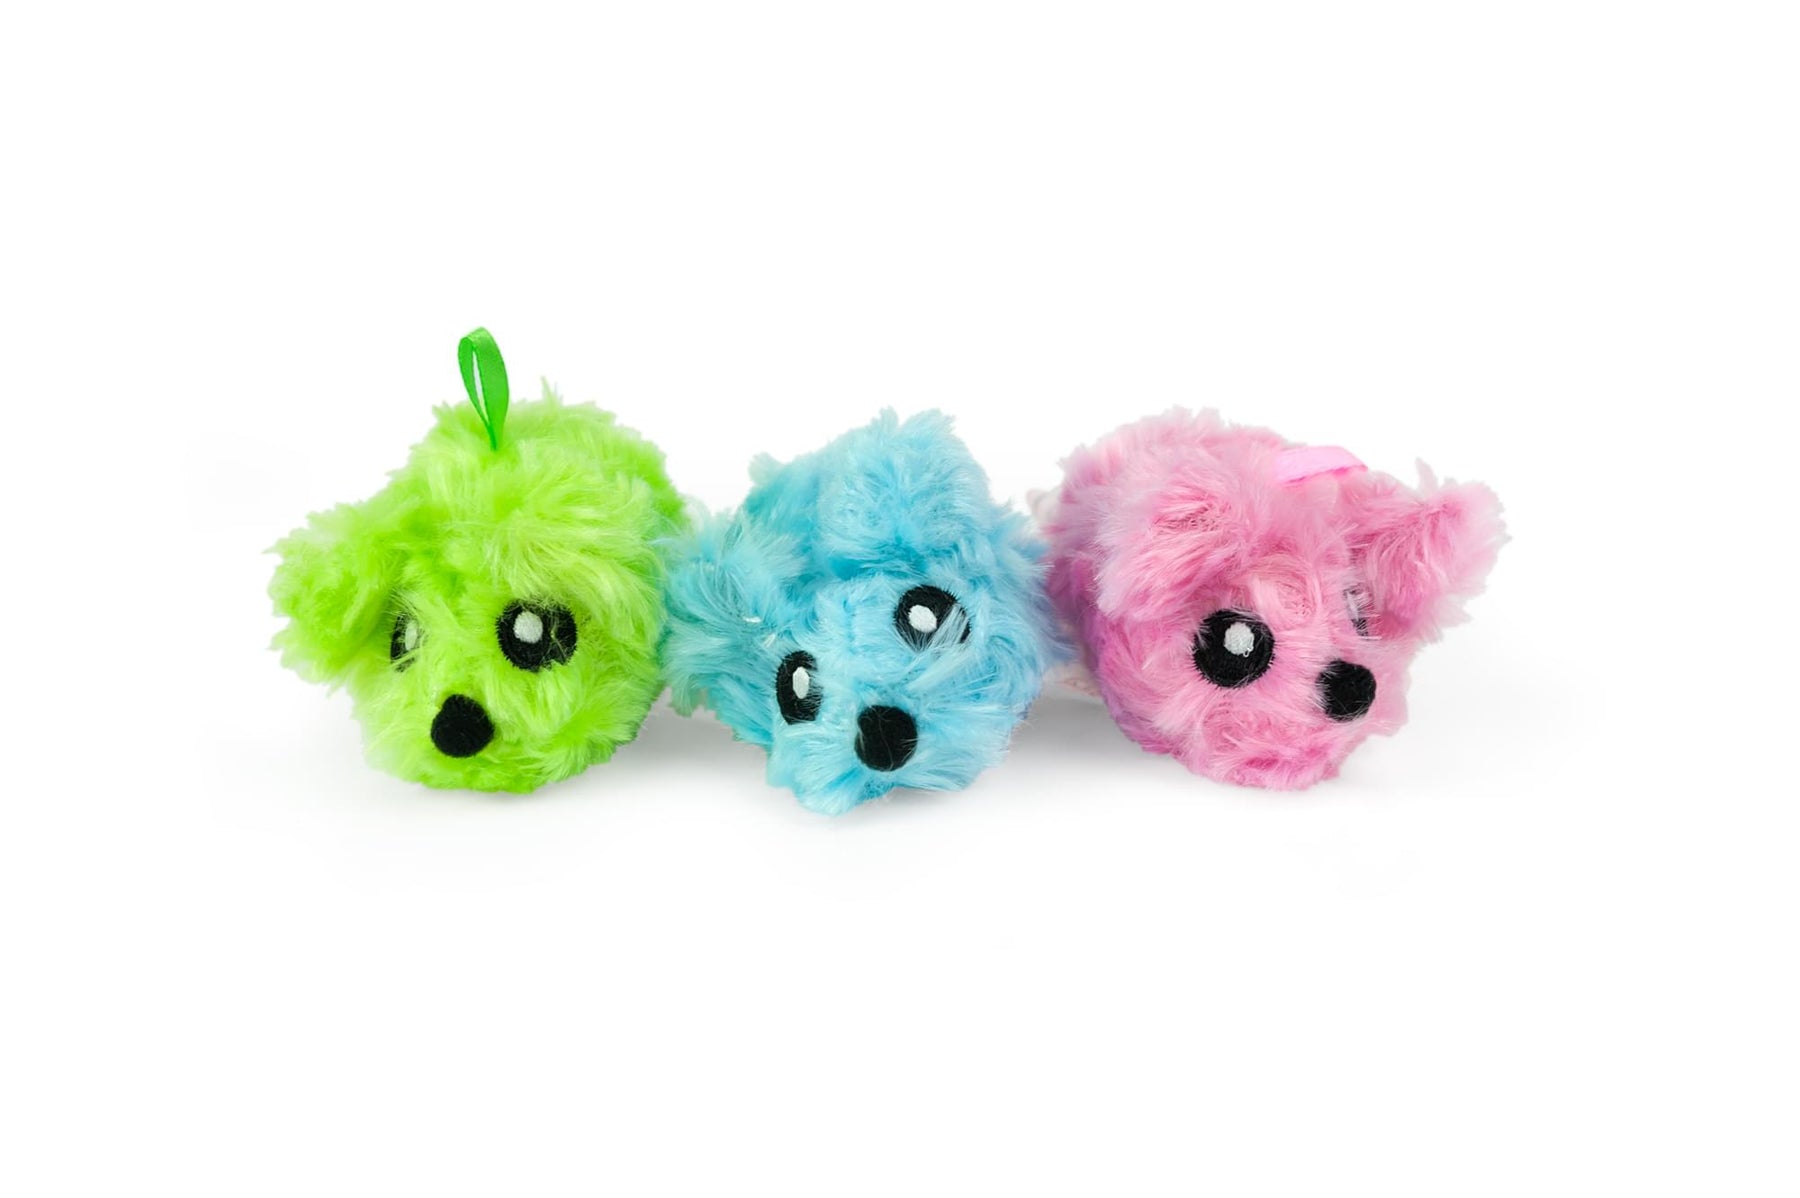 Tentacle Kitty 5 Inch Cotton Candy Mice Plush | Unscented 3 Pack